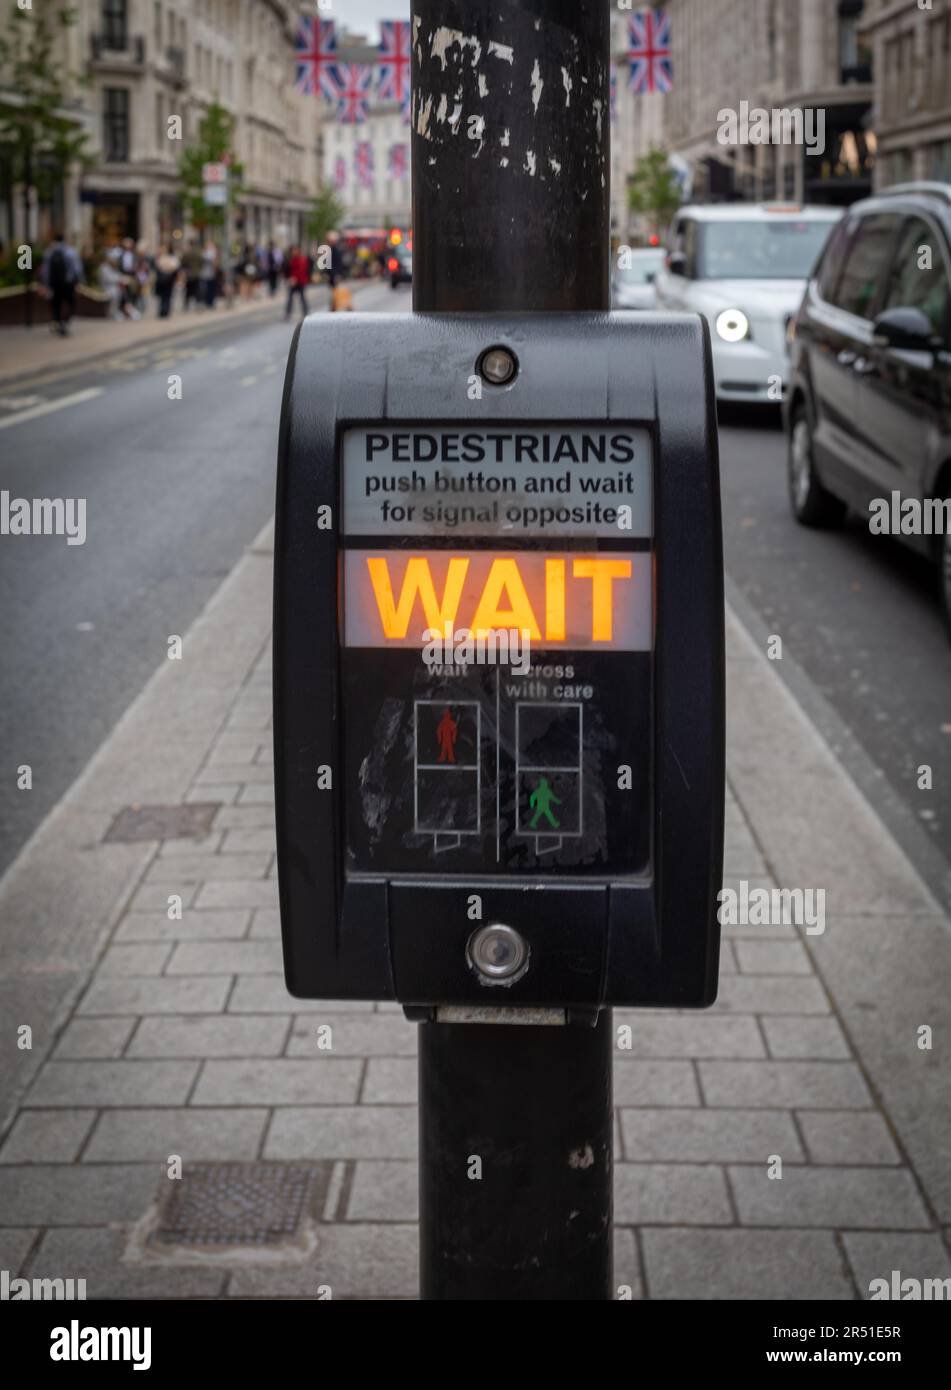 Pushbutton control for pedestrian crossing known as pelican crossing in London, UK. Stock Photo